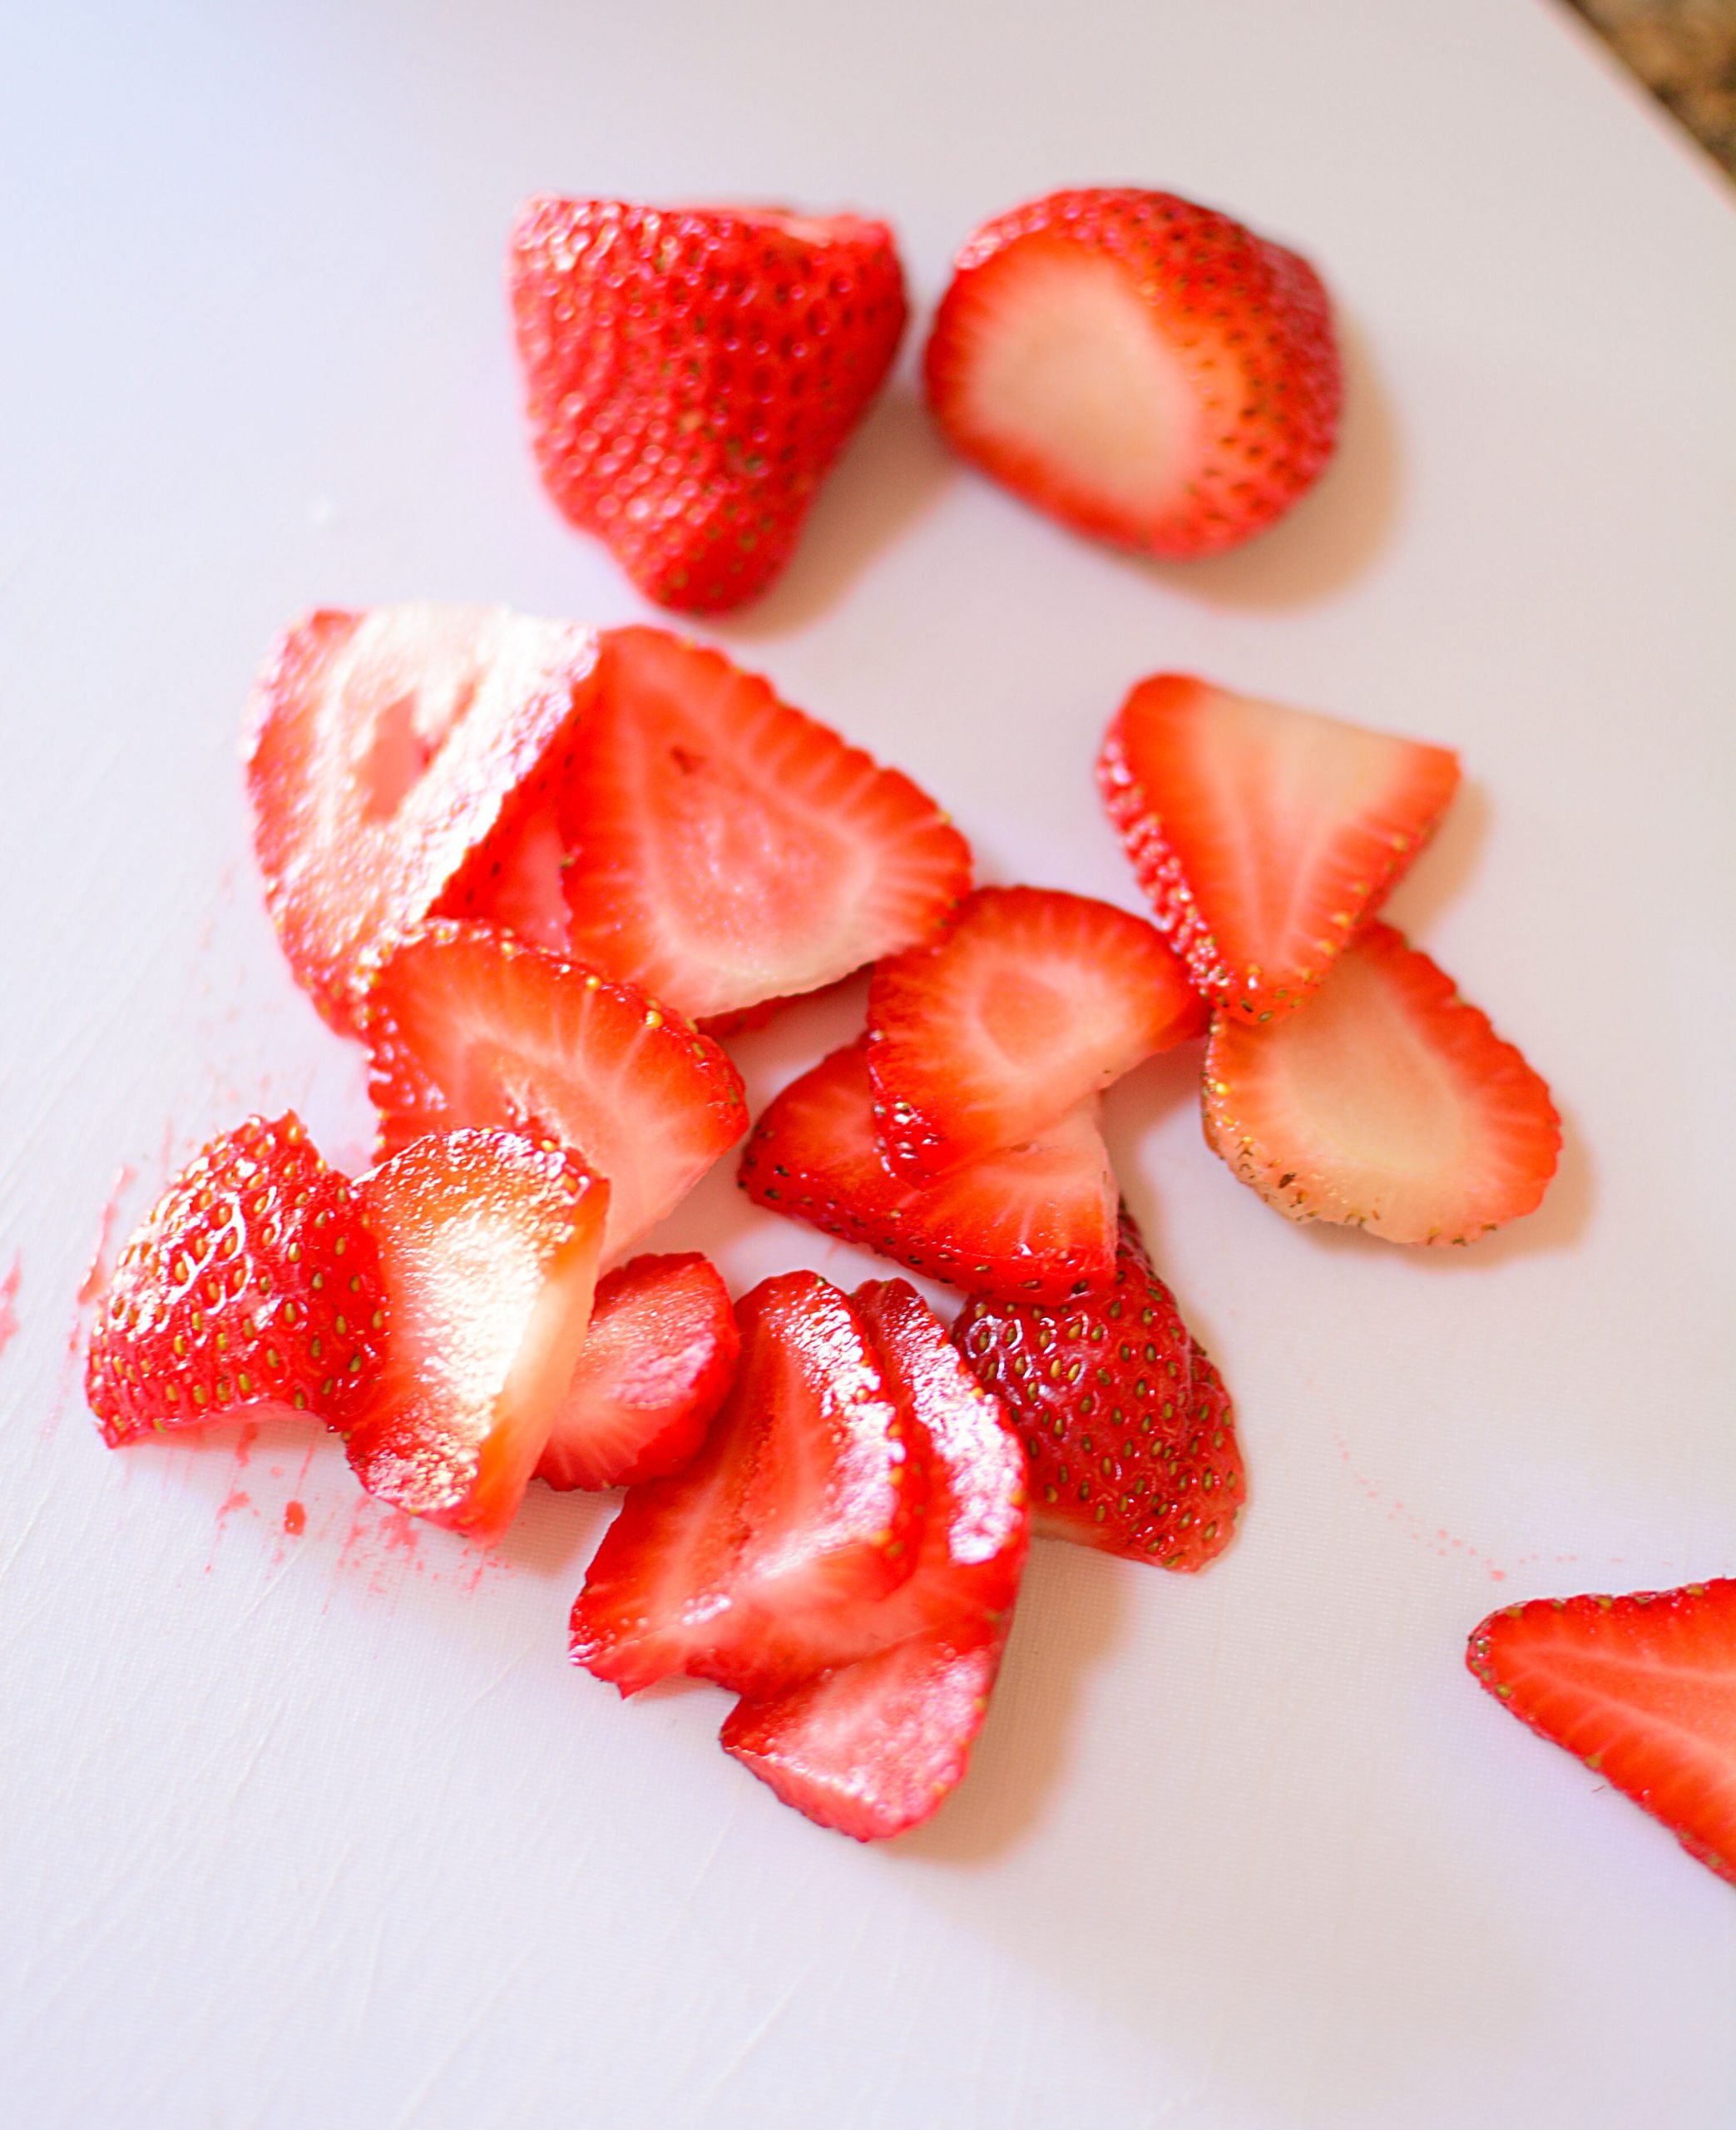 Sliced strawberries on a white plastic cutting board.